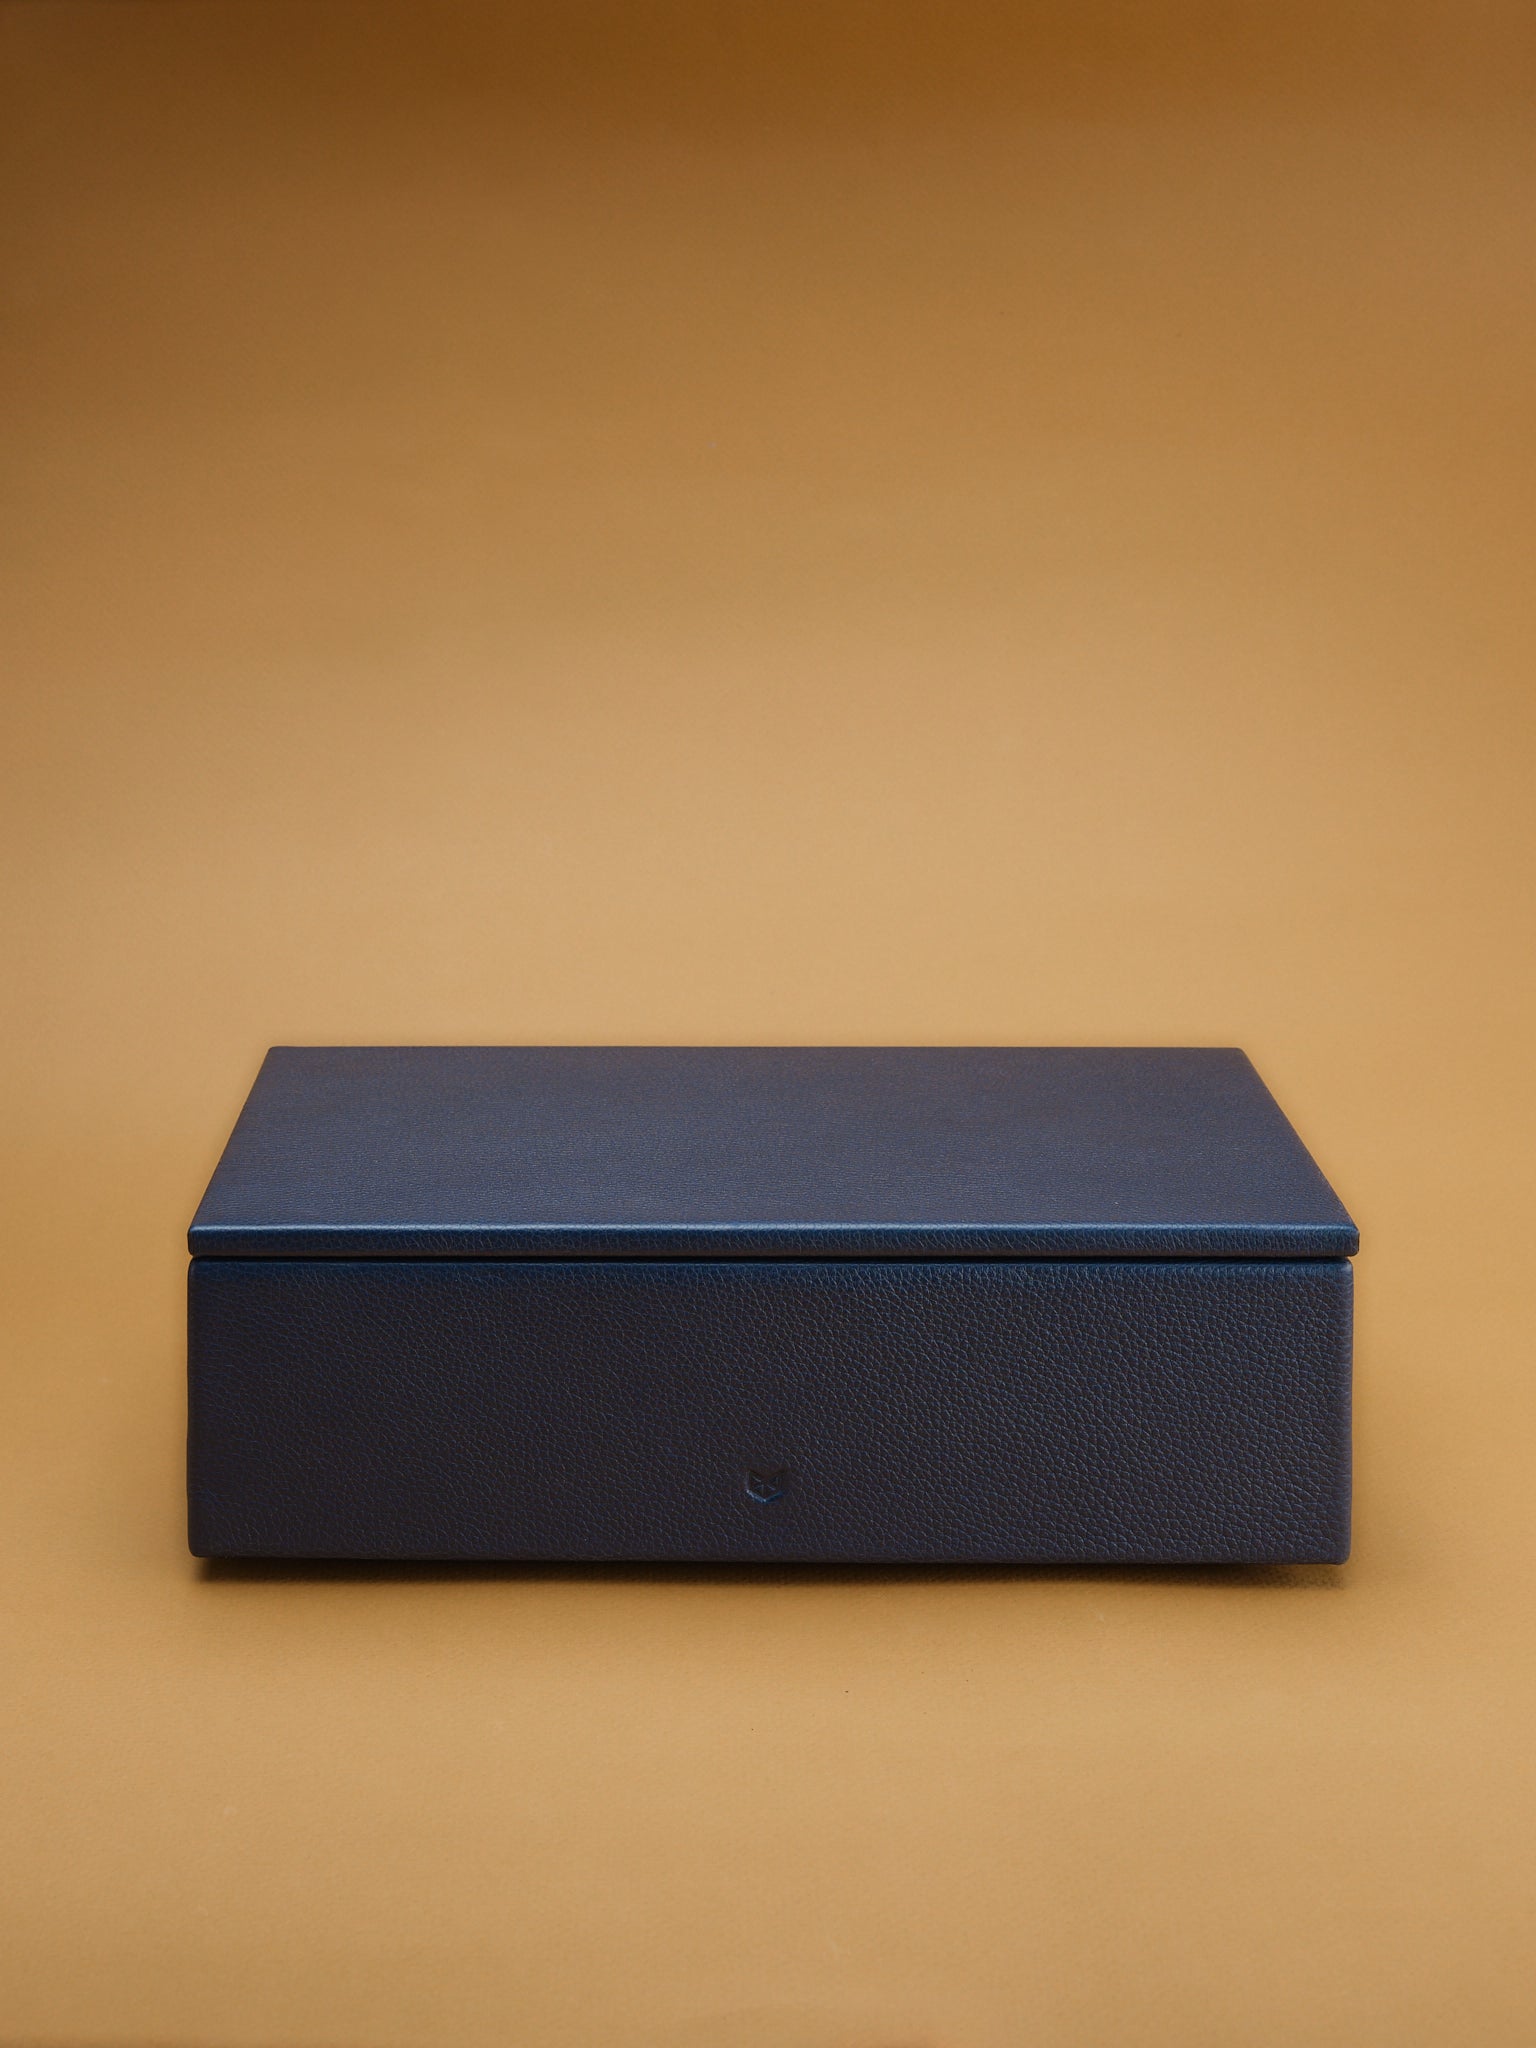 Push-on Closure. The Watch Box Navy by Capra Leather